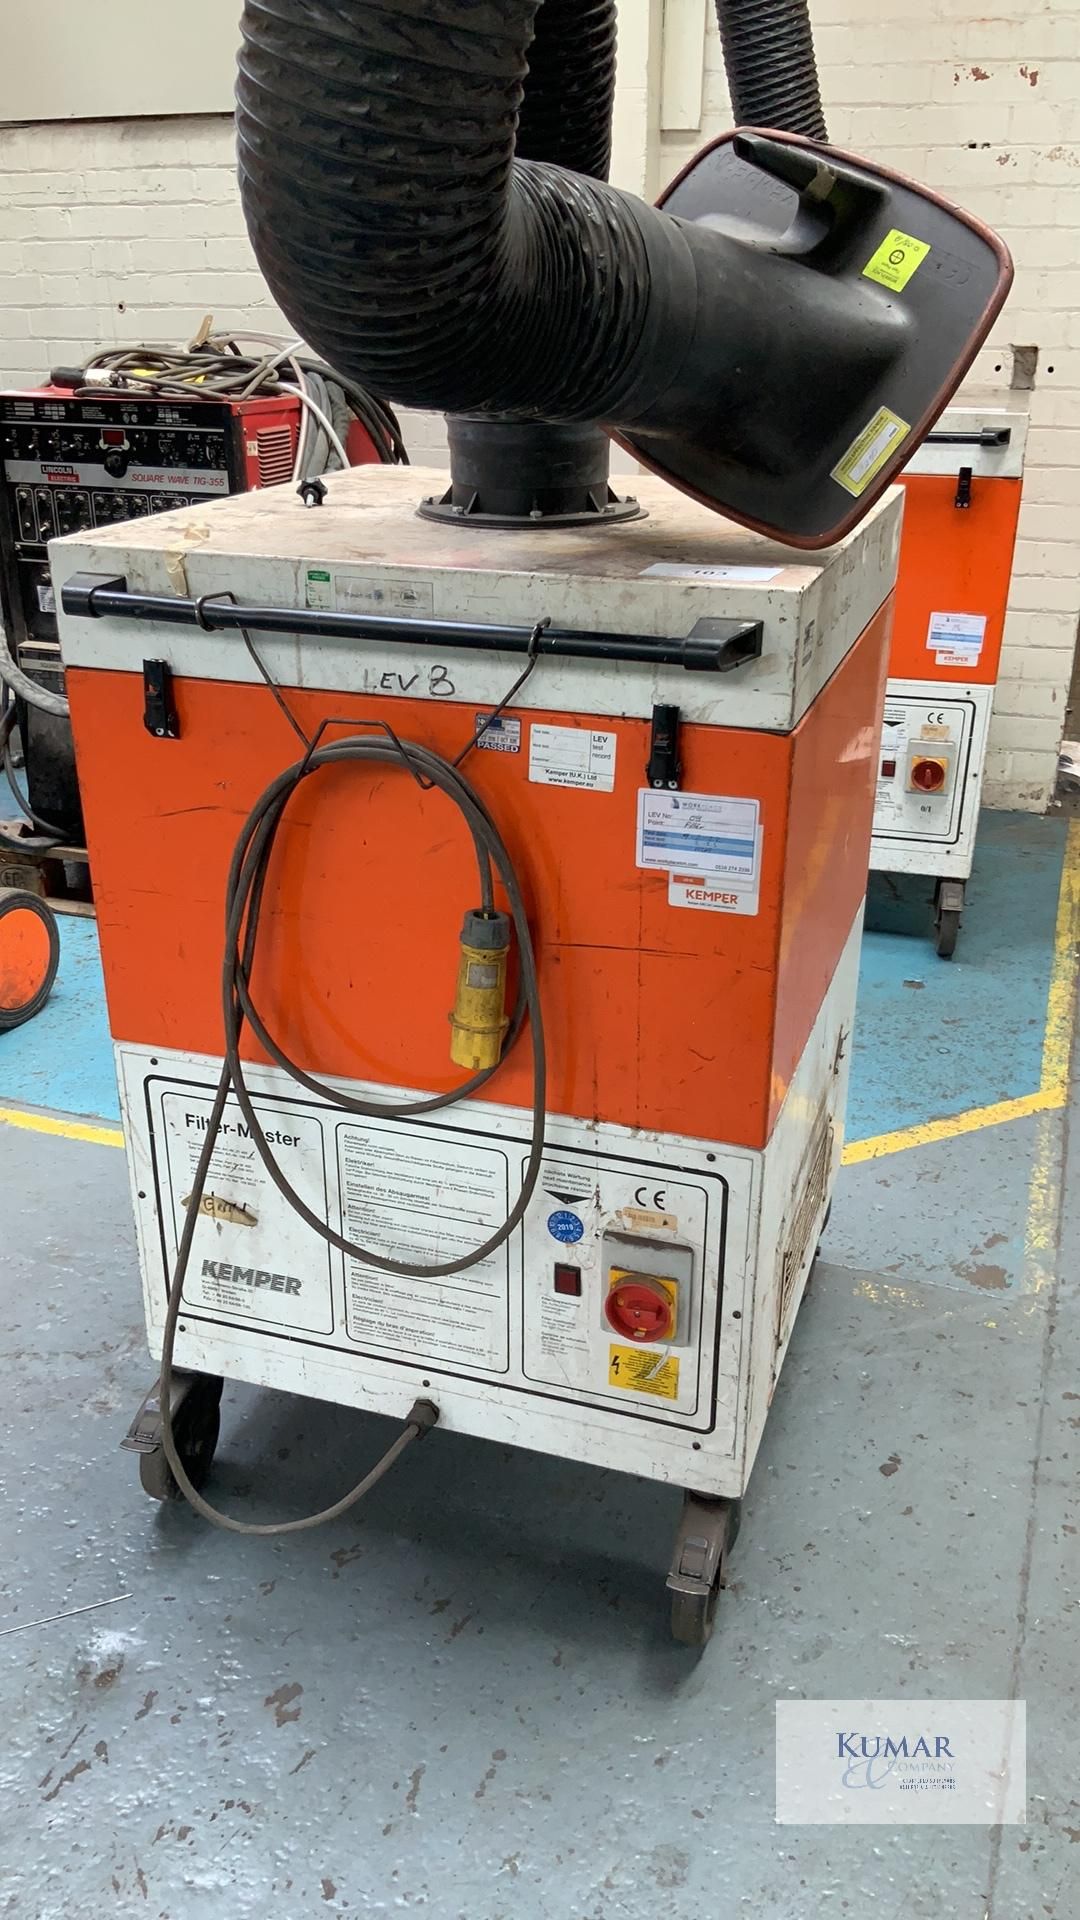 Kemper Filter Master, Type 64121 Mobile Fume Extraction Unit, Weight 80Kg, Serial No.256655, (02/ - Image 3 of 6